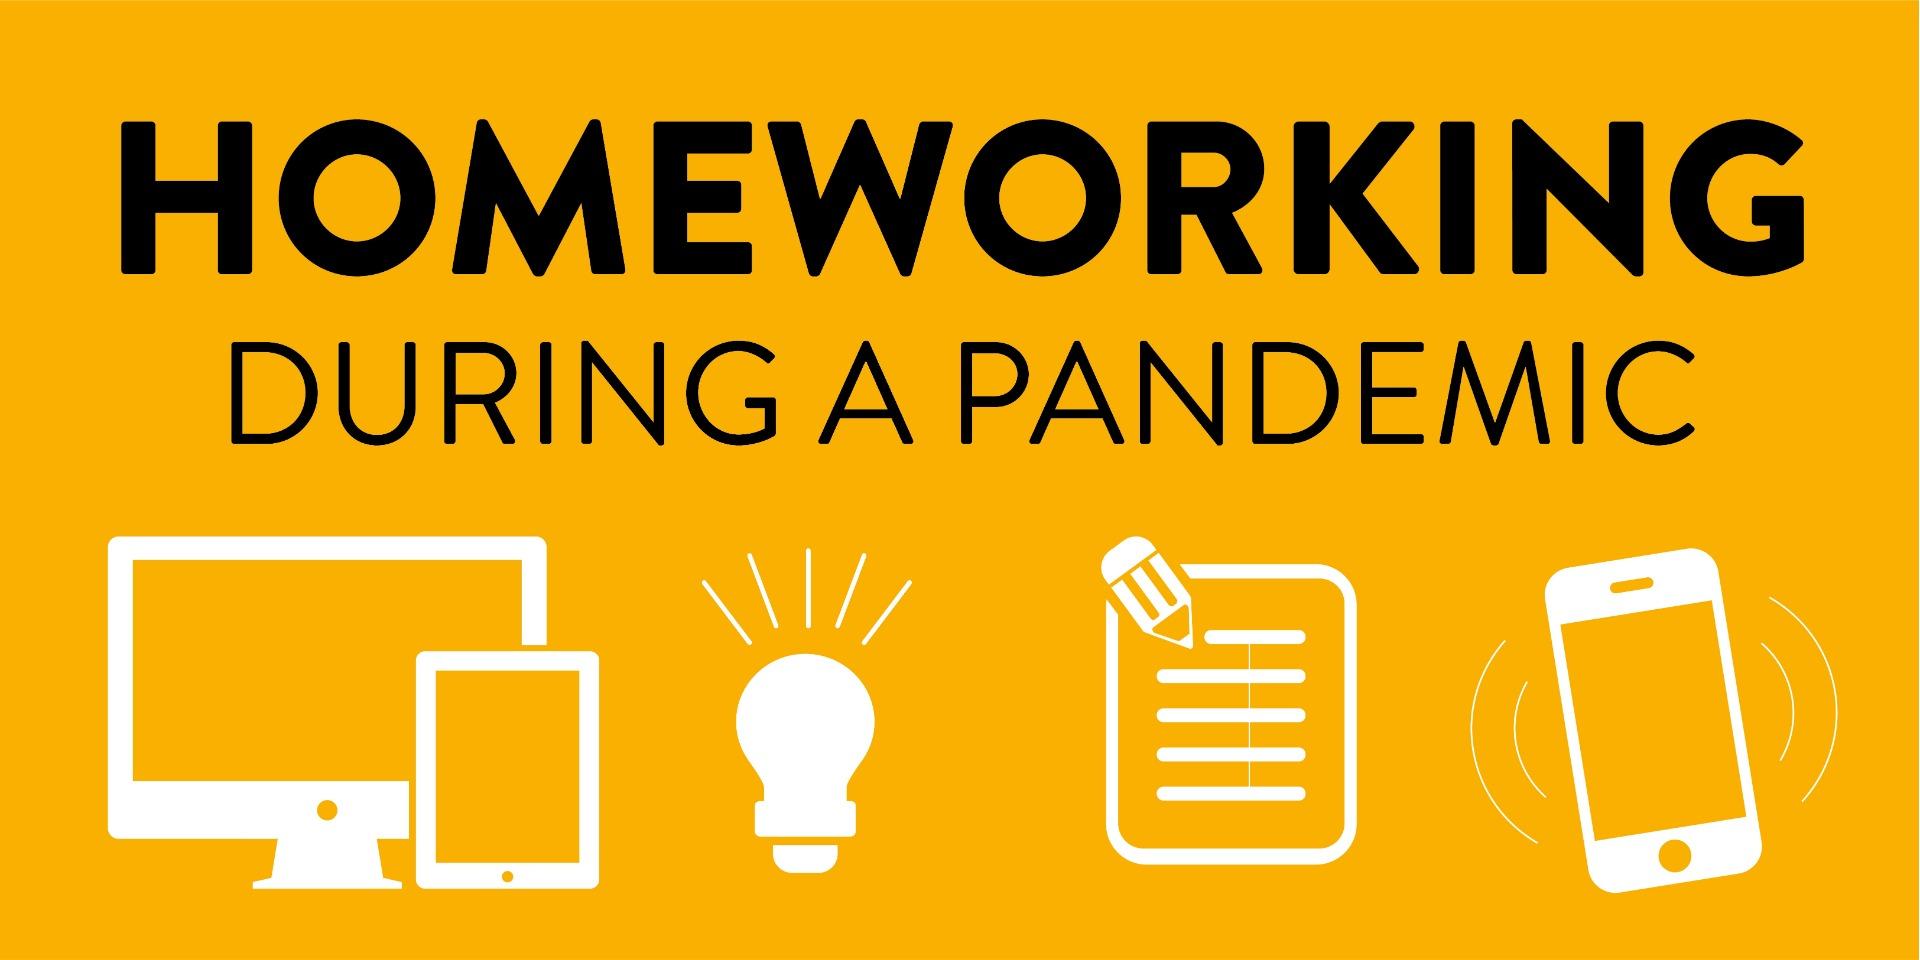 Homeworking During a Pandemic - One Year on